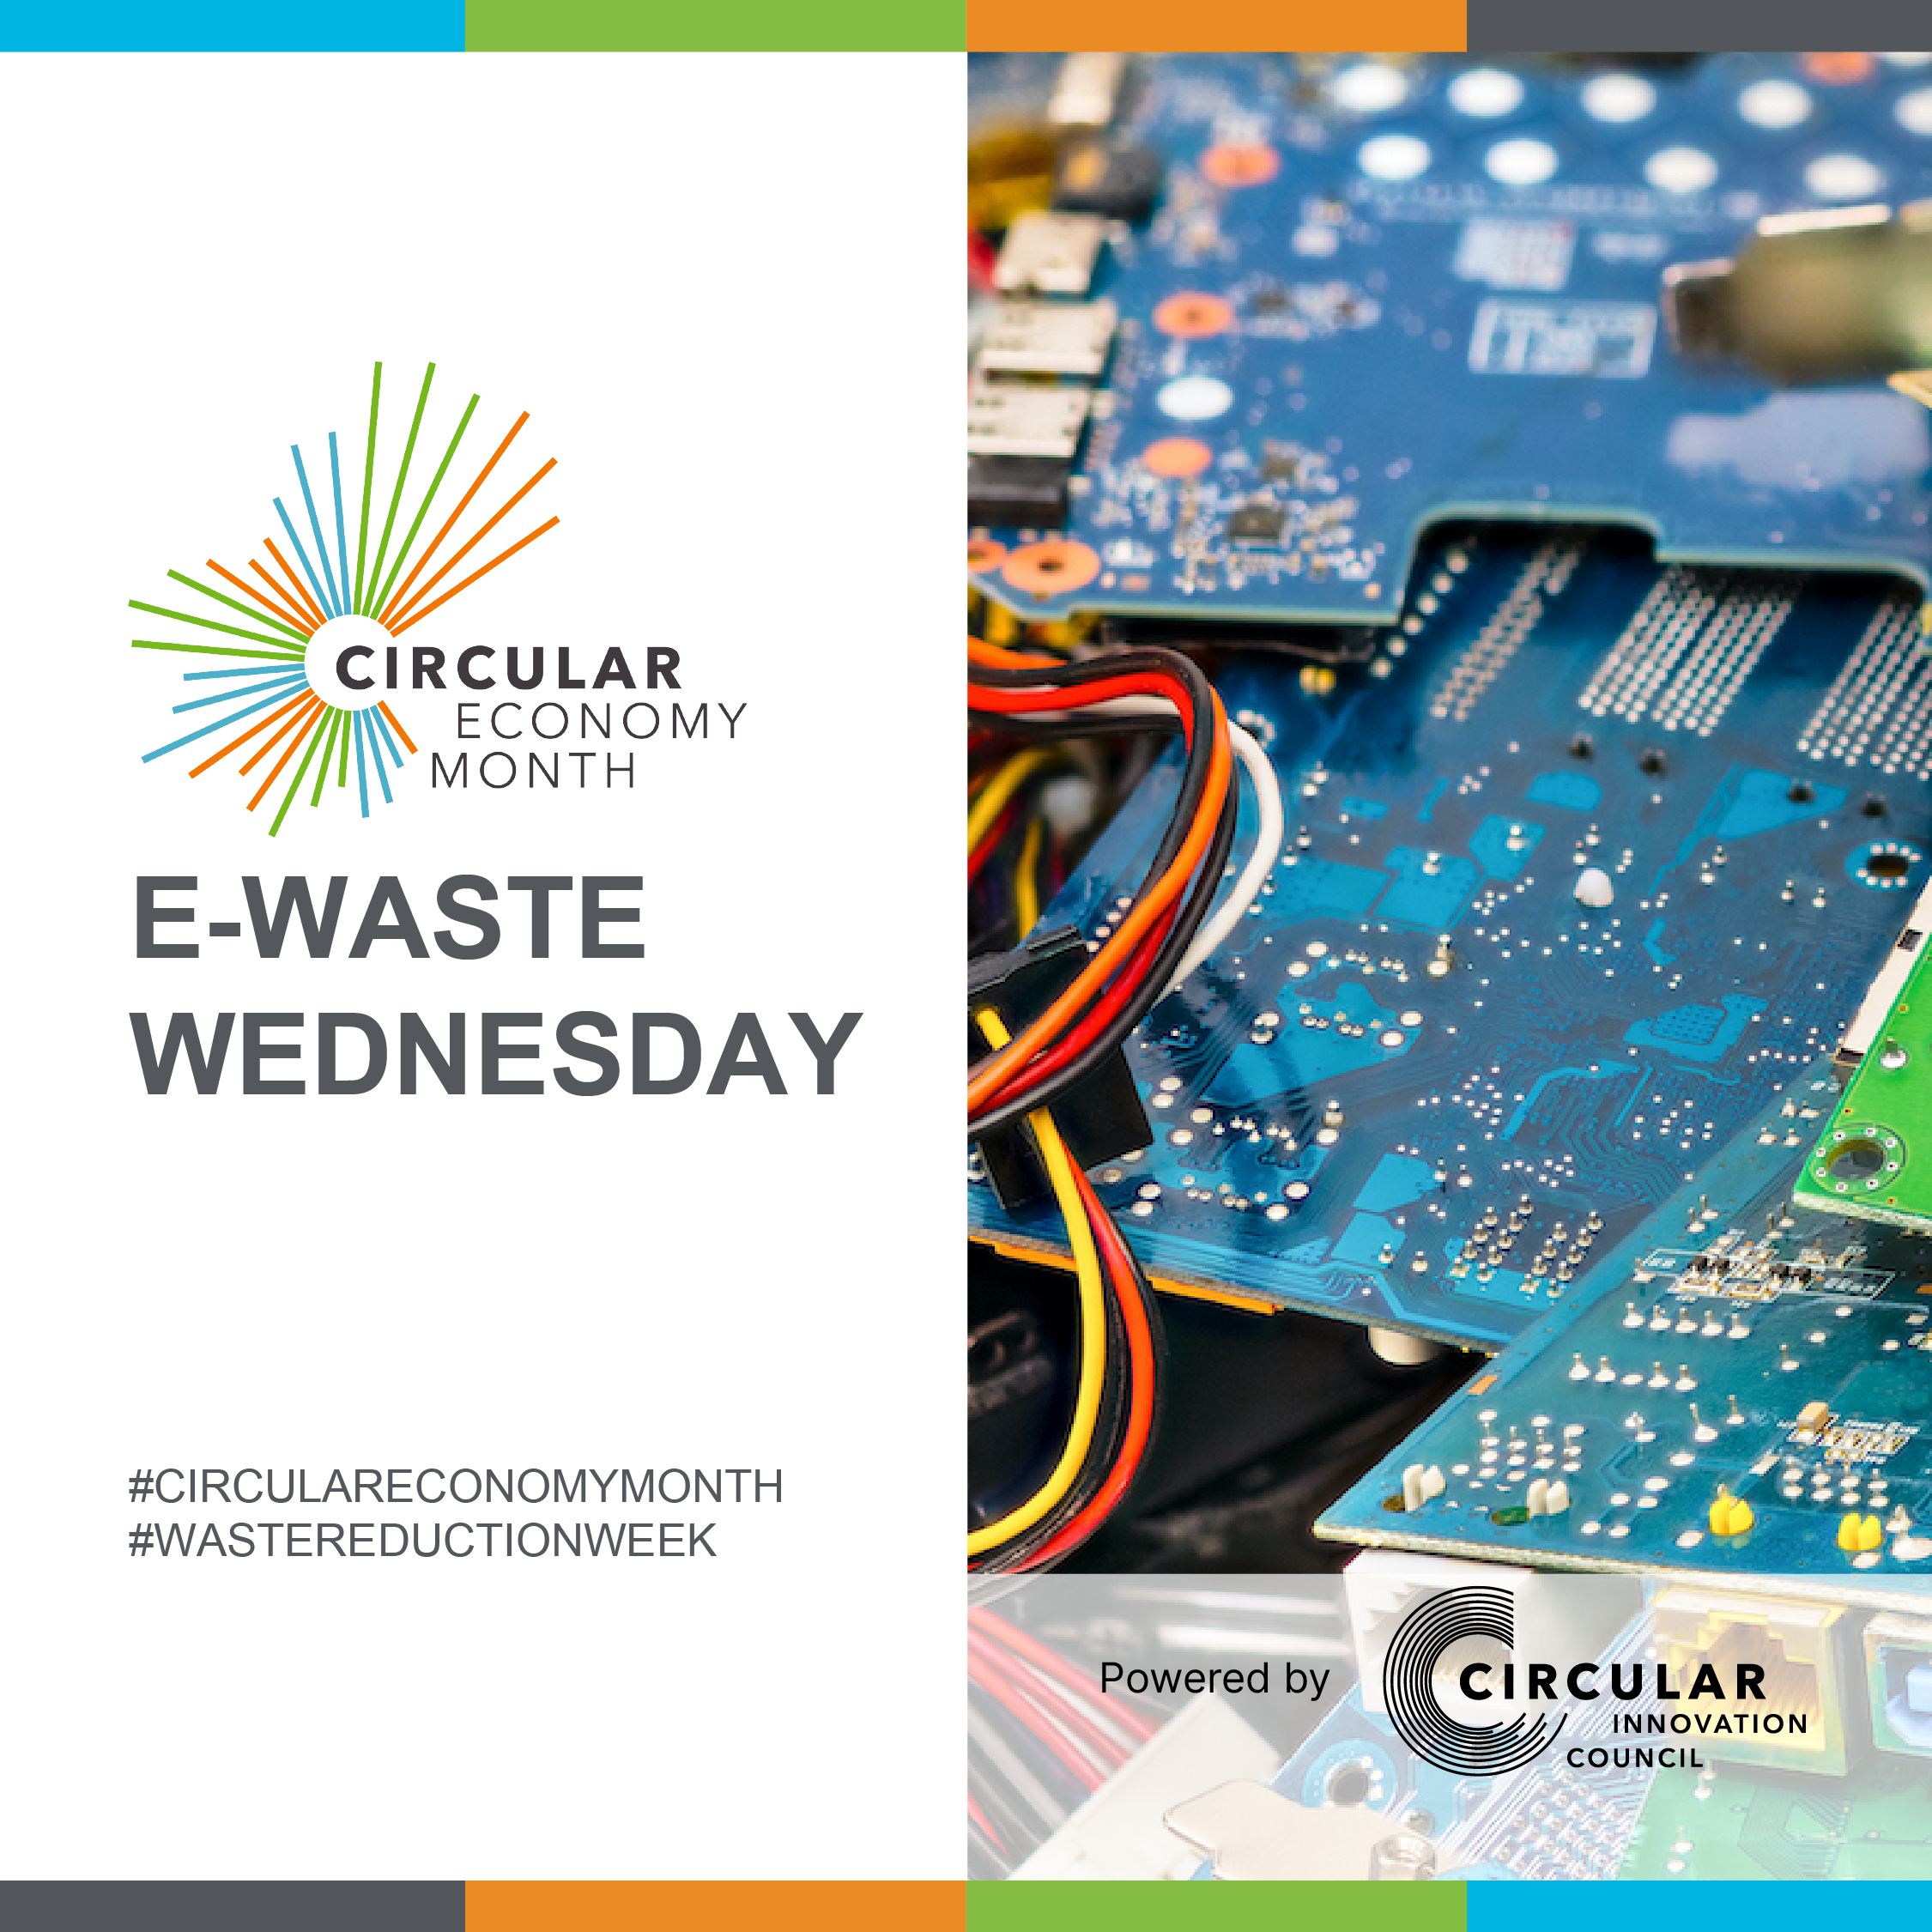 : Green and blue computer chips collected into a pile. E-Waste Wednesday. Circular Economy Month, powered by Circular Innovation Council. #CircularEconomyMonth #WasteReductionWeek.